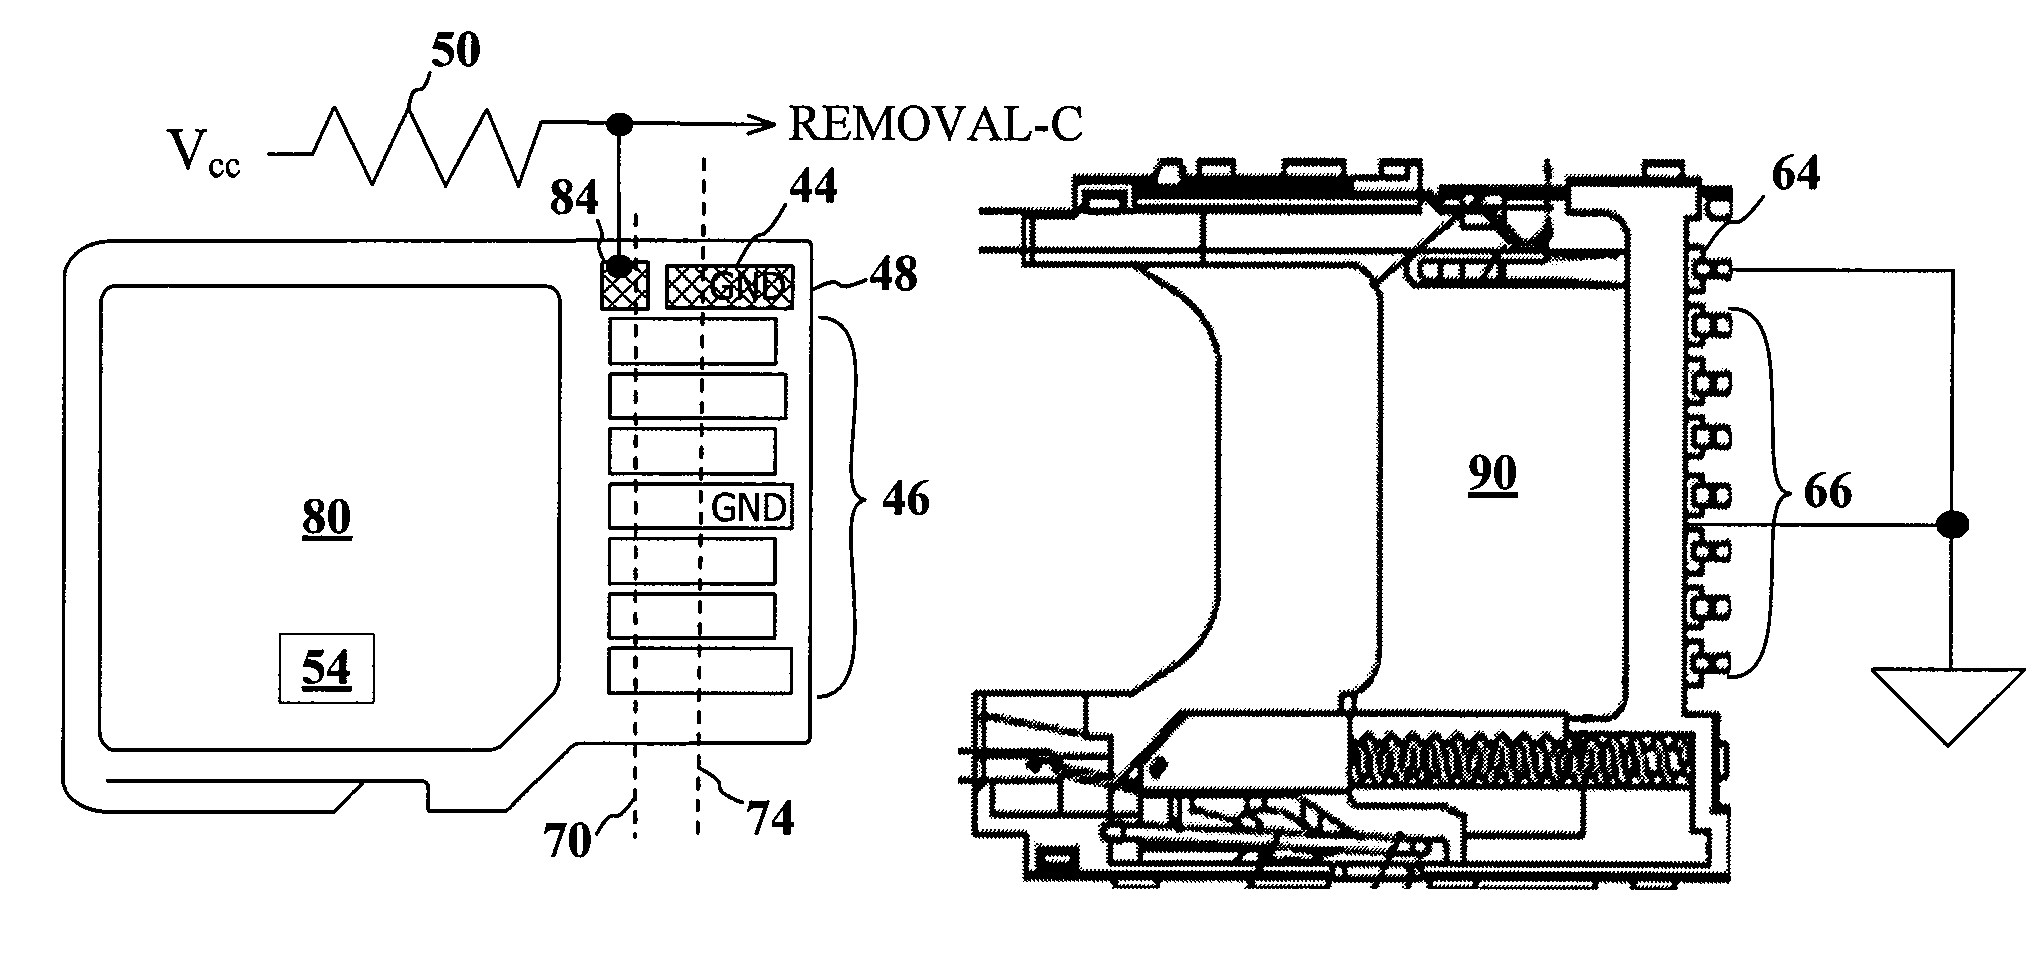 Advanced detection of memory device removal, and methods, devices and connectors